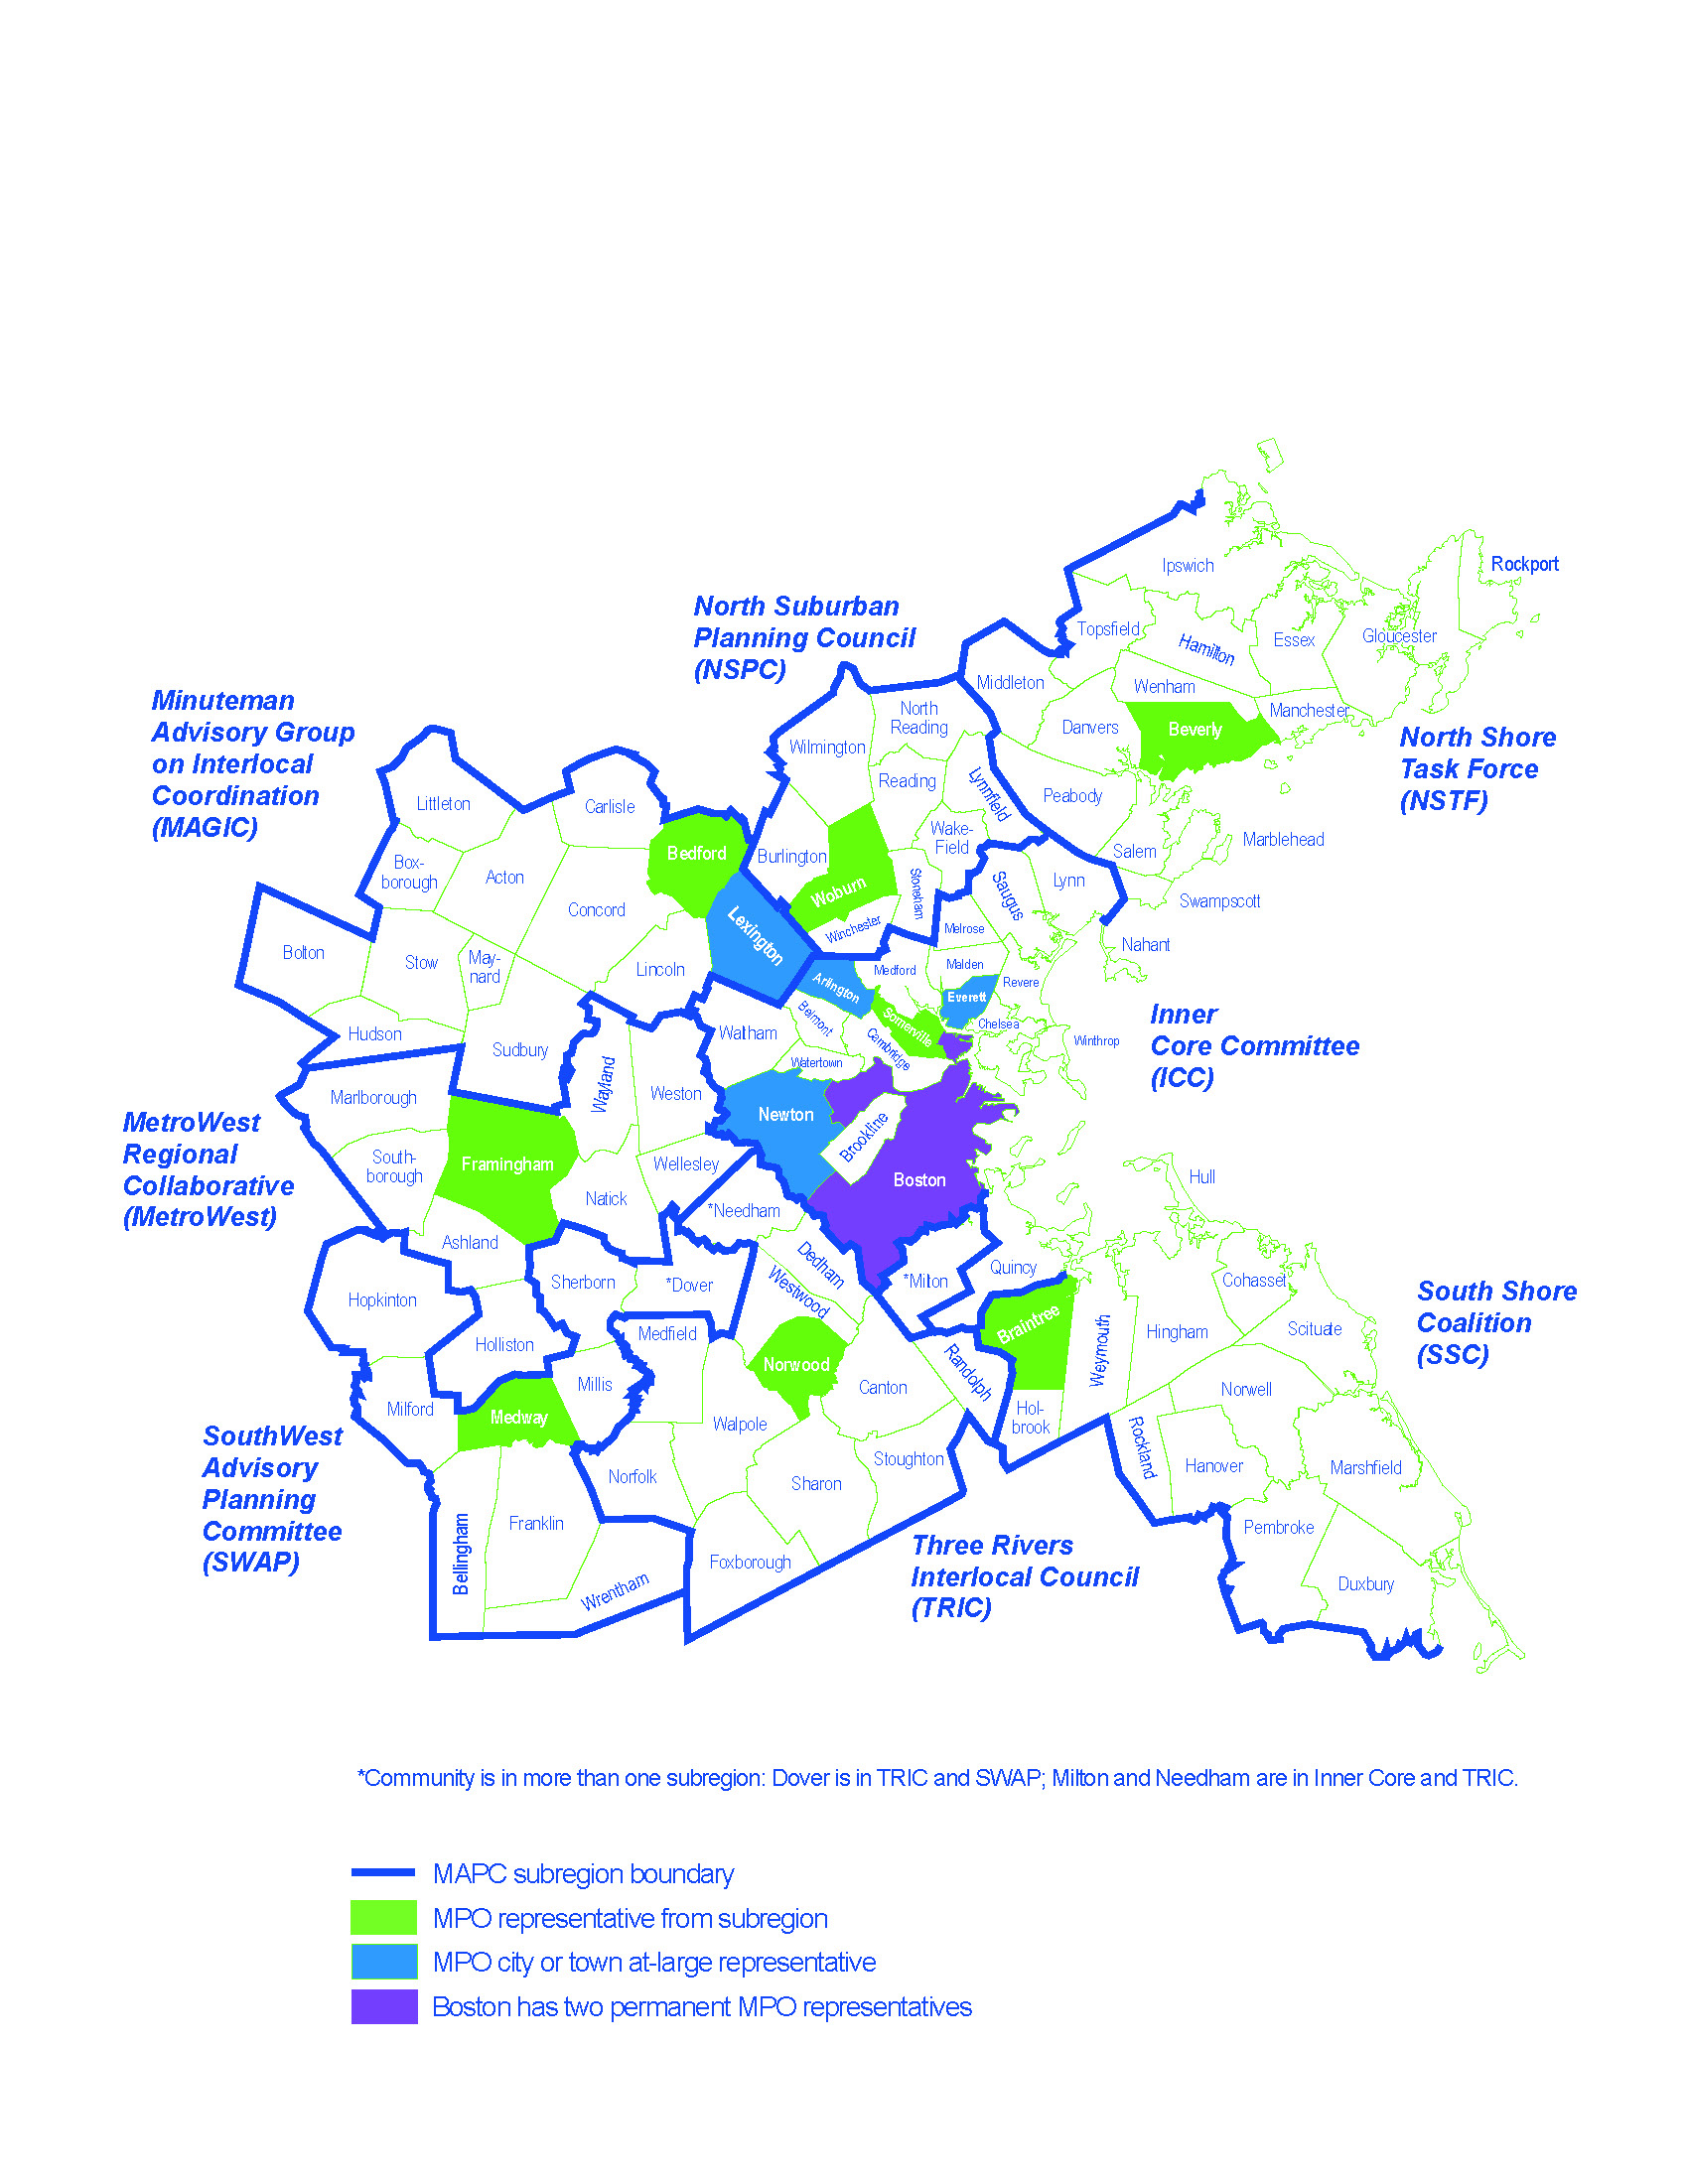 Figure 4 is a map outlining the Boston Region MPO area and MAPC subregions. The subregions are denoted by a thick blue outline, and consist of: North Suburban Planning Council, North Shore Task Force, Inner Core Committee, South Shore Coalition, Three Rivers Interlocal Council, SouthWest Advisory Planning Committee, MetroWest Regional Collaborative, and Minuteman Advisory Group on Interlocal Coordination. The community in each subregion that currently has a seat on the MPO is highlighted in green. They include Woburn for the North Suburban Planning Council; Beverly for the North Shore Task Force; Somerville for the Inner Core Committee; Braintree for the South Shore Coalition; Norwood for the Three Rivers Interlocal Council; Medway for the SouthWest Advisory Planning Committee; Framingham for the MetroWest Regional Collaborative, and Bedford for Minuteman Advisory Group on Interlocal Coordination. The At-Large cities (Everett and Newton) and towns (Arlington and Lexington) that have seats on the MPO are highlighted in blue. The City of Boston, which has two permanent seats on the MPO, is highlighted in purple. Two communities fall into more than one subregion. Dover is included in both the Three Rivers Interlocal Council and the Southwest Advisory Planning Committee, and Milton and Needham are included in both the Inner Core Committee and the Three Rivers Interlocal Council. 